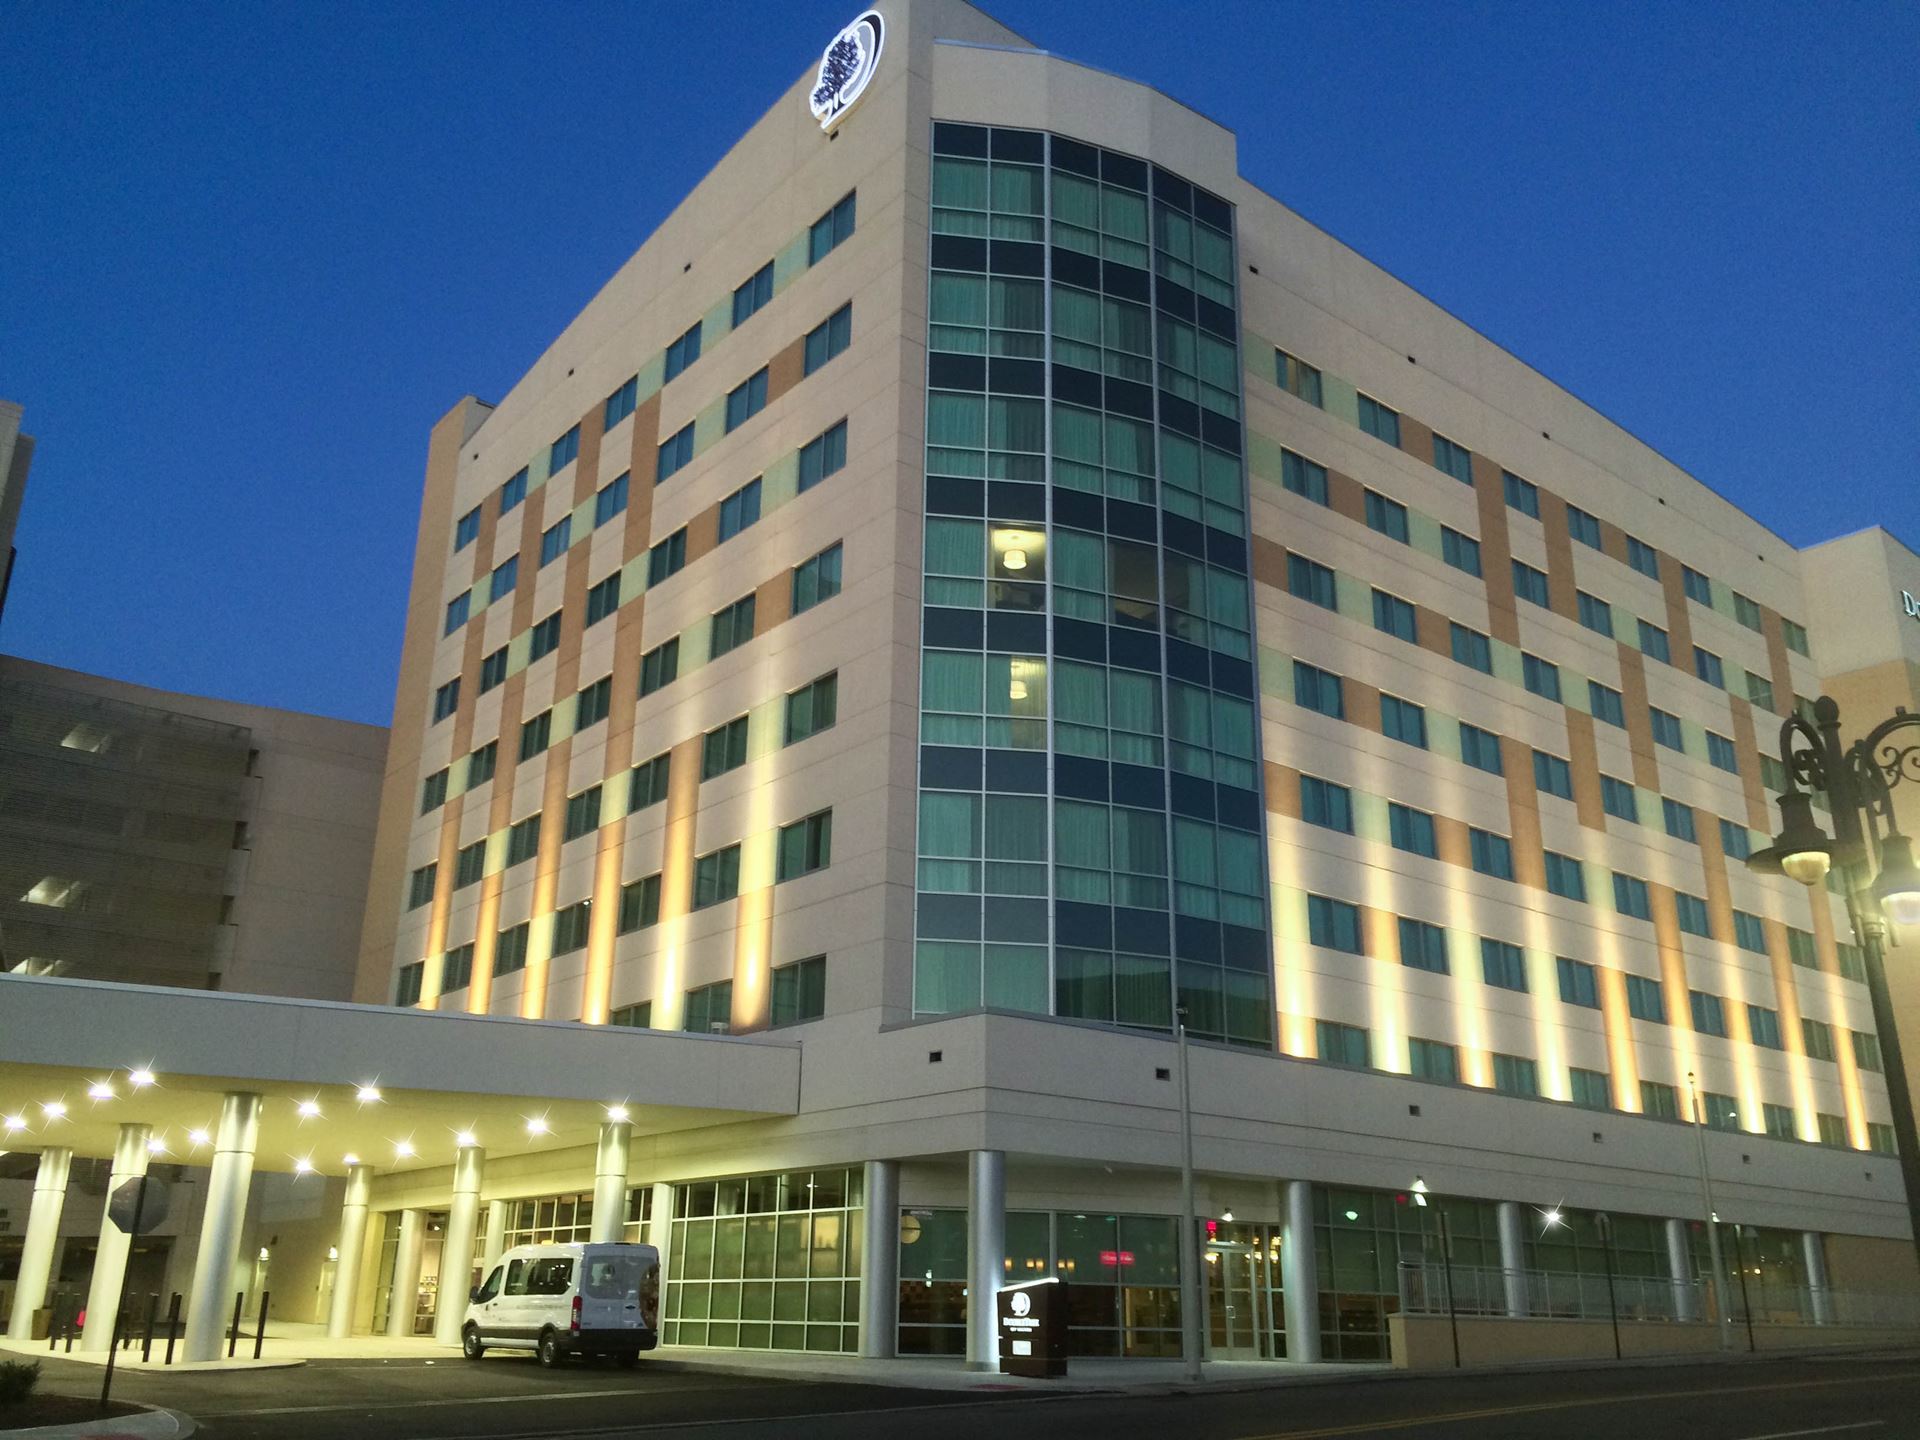 Exterior Image of DoubleTree by Hilton Reading (Photo Credit: DoubleTree by Hilton Reading)